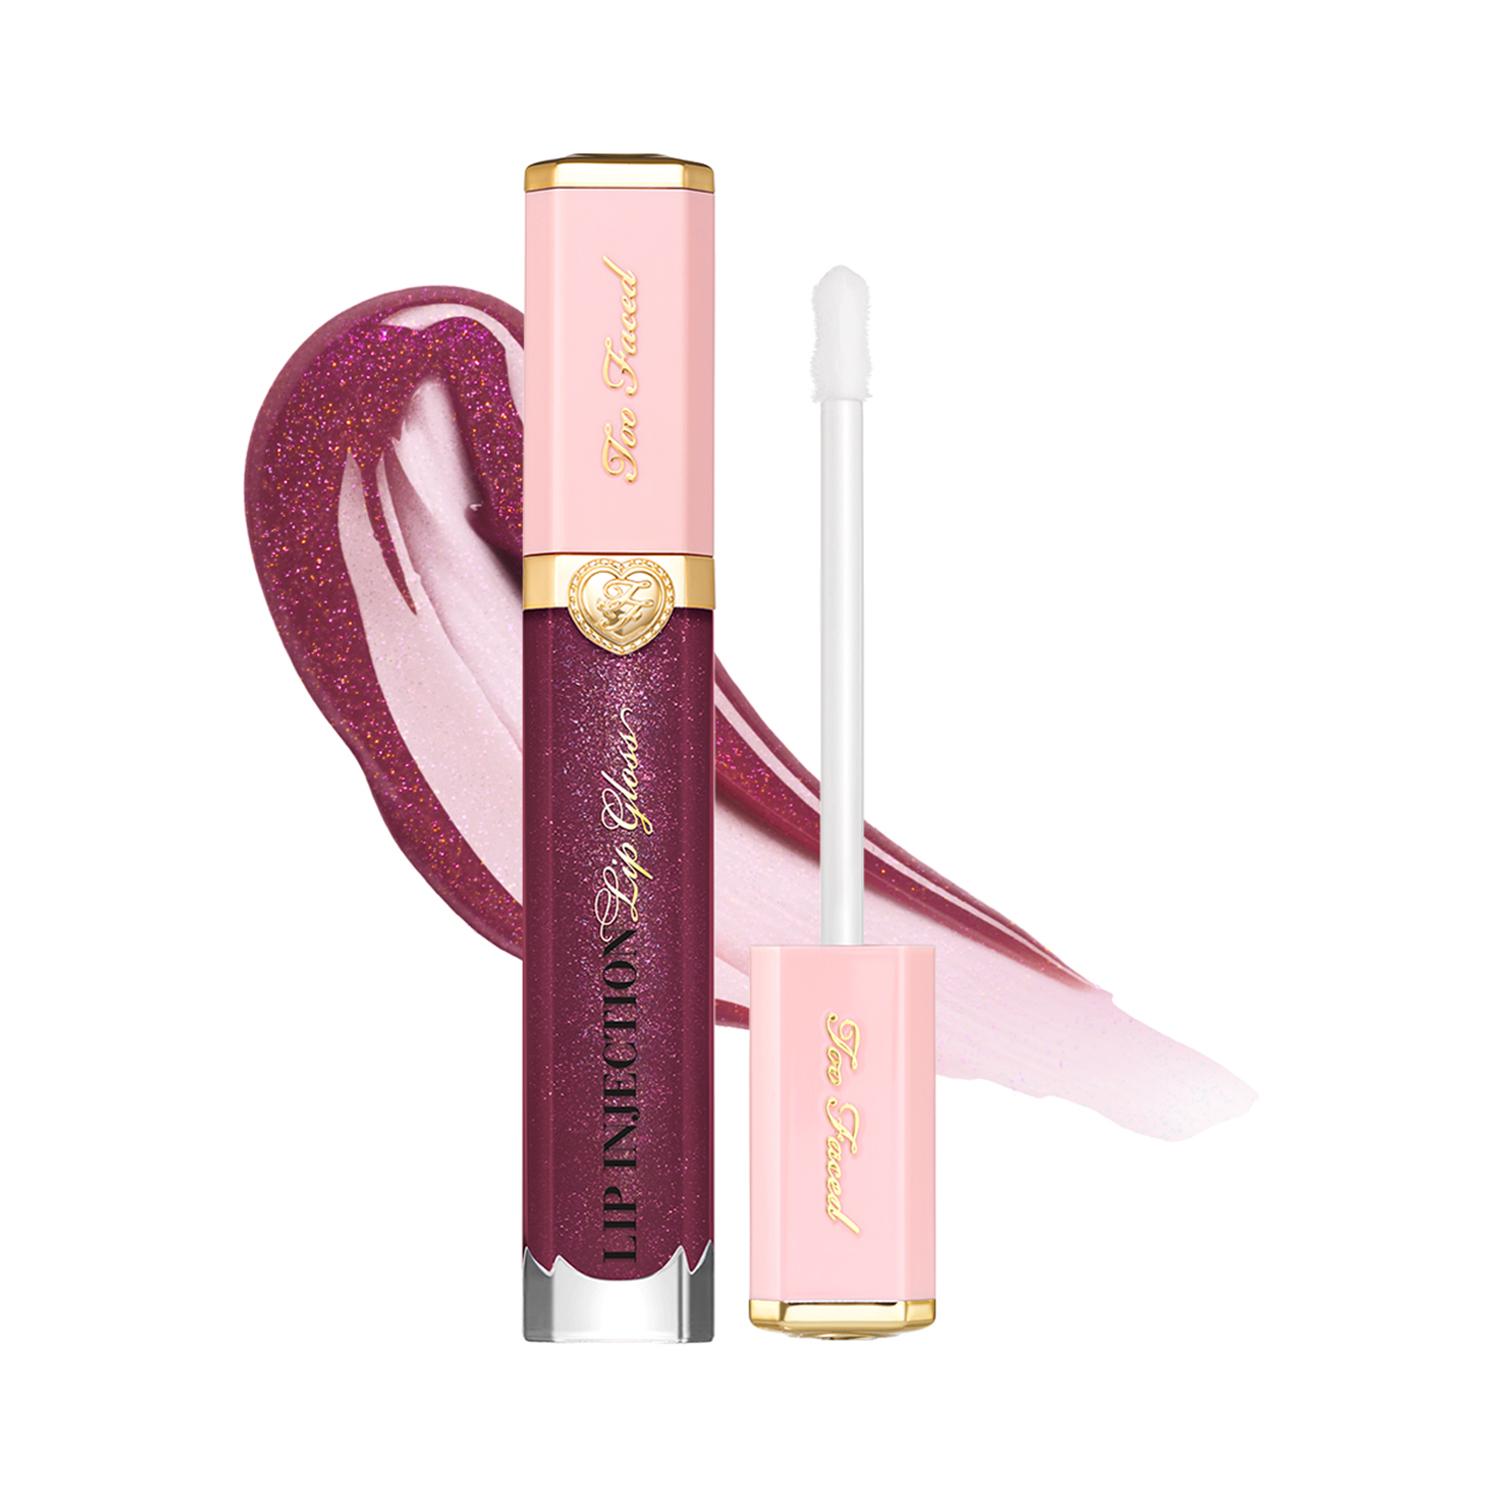 Too Faced | Too Faced Lip Injection Power Plumping Lip Gloss - Hot Love (7ml)